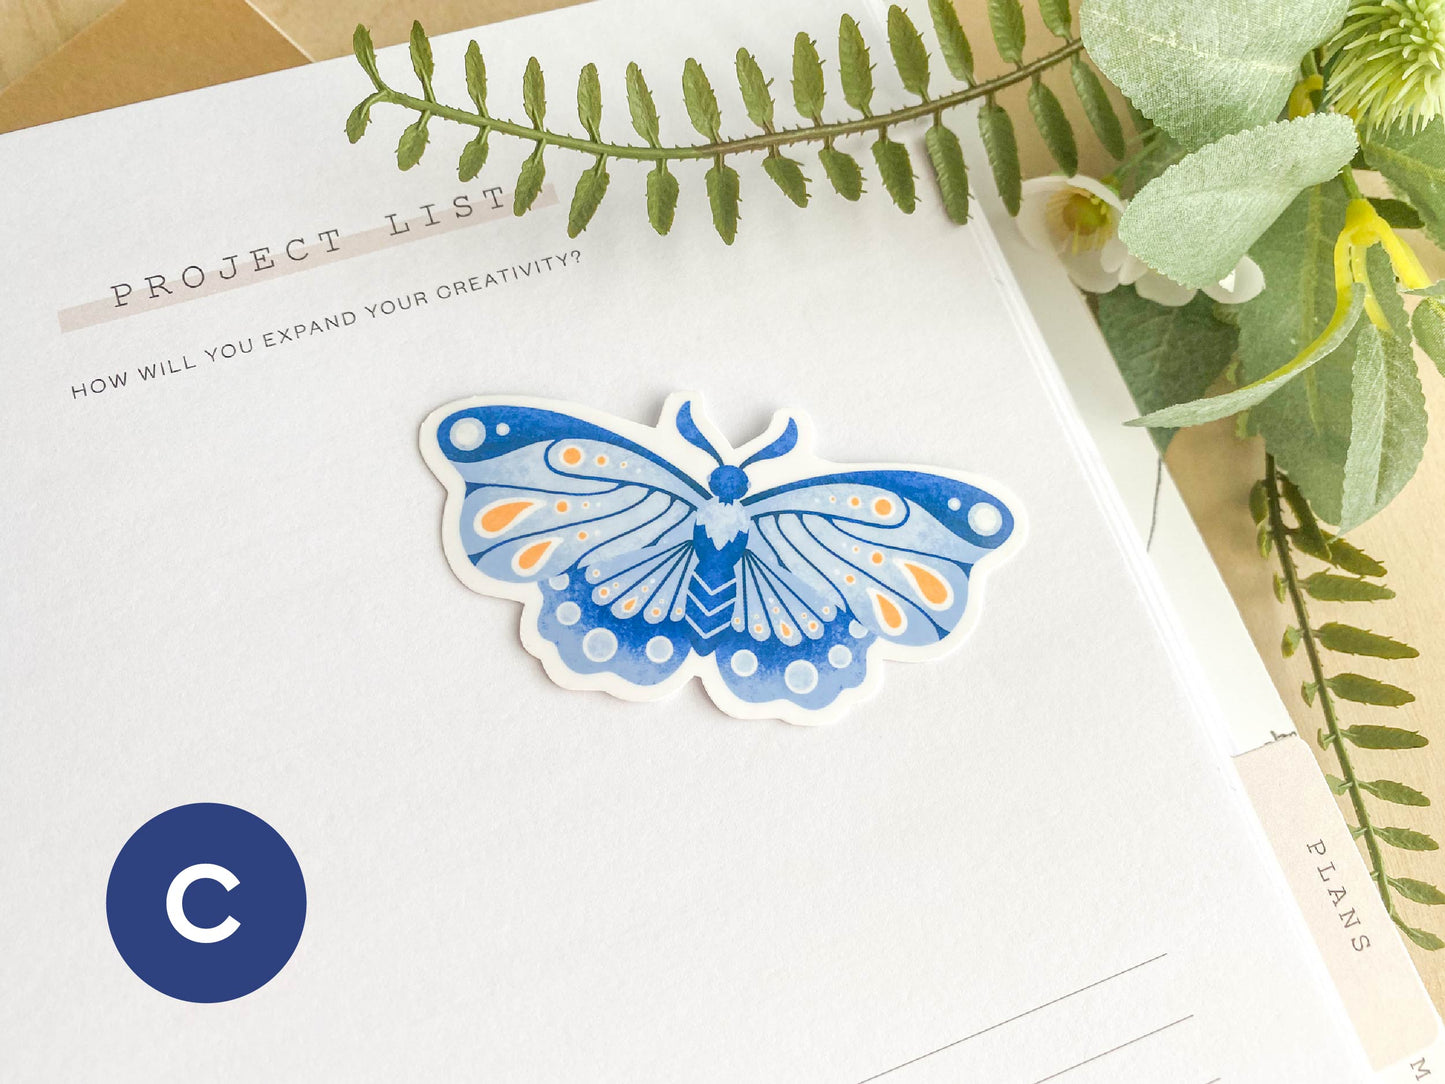 Butterfly & Moth Vinyl Stickers | Waterproof and Glossy